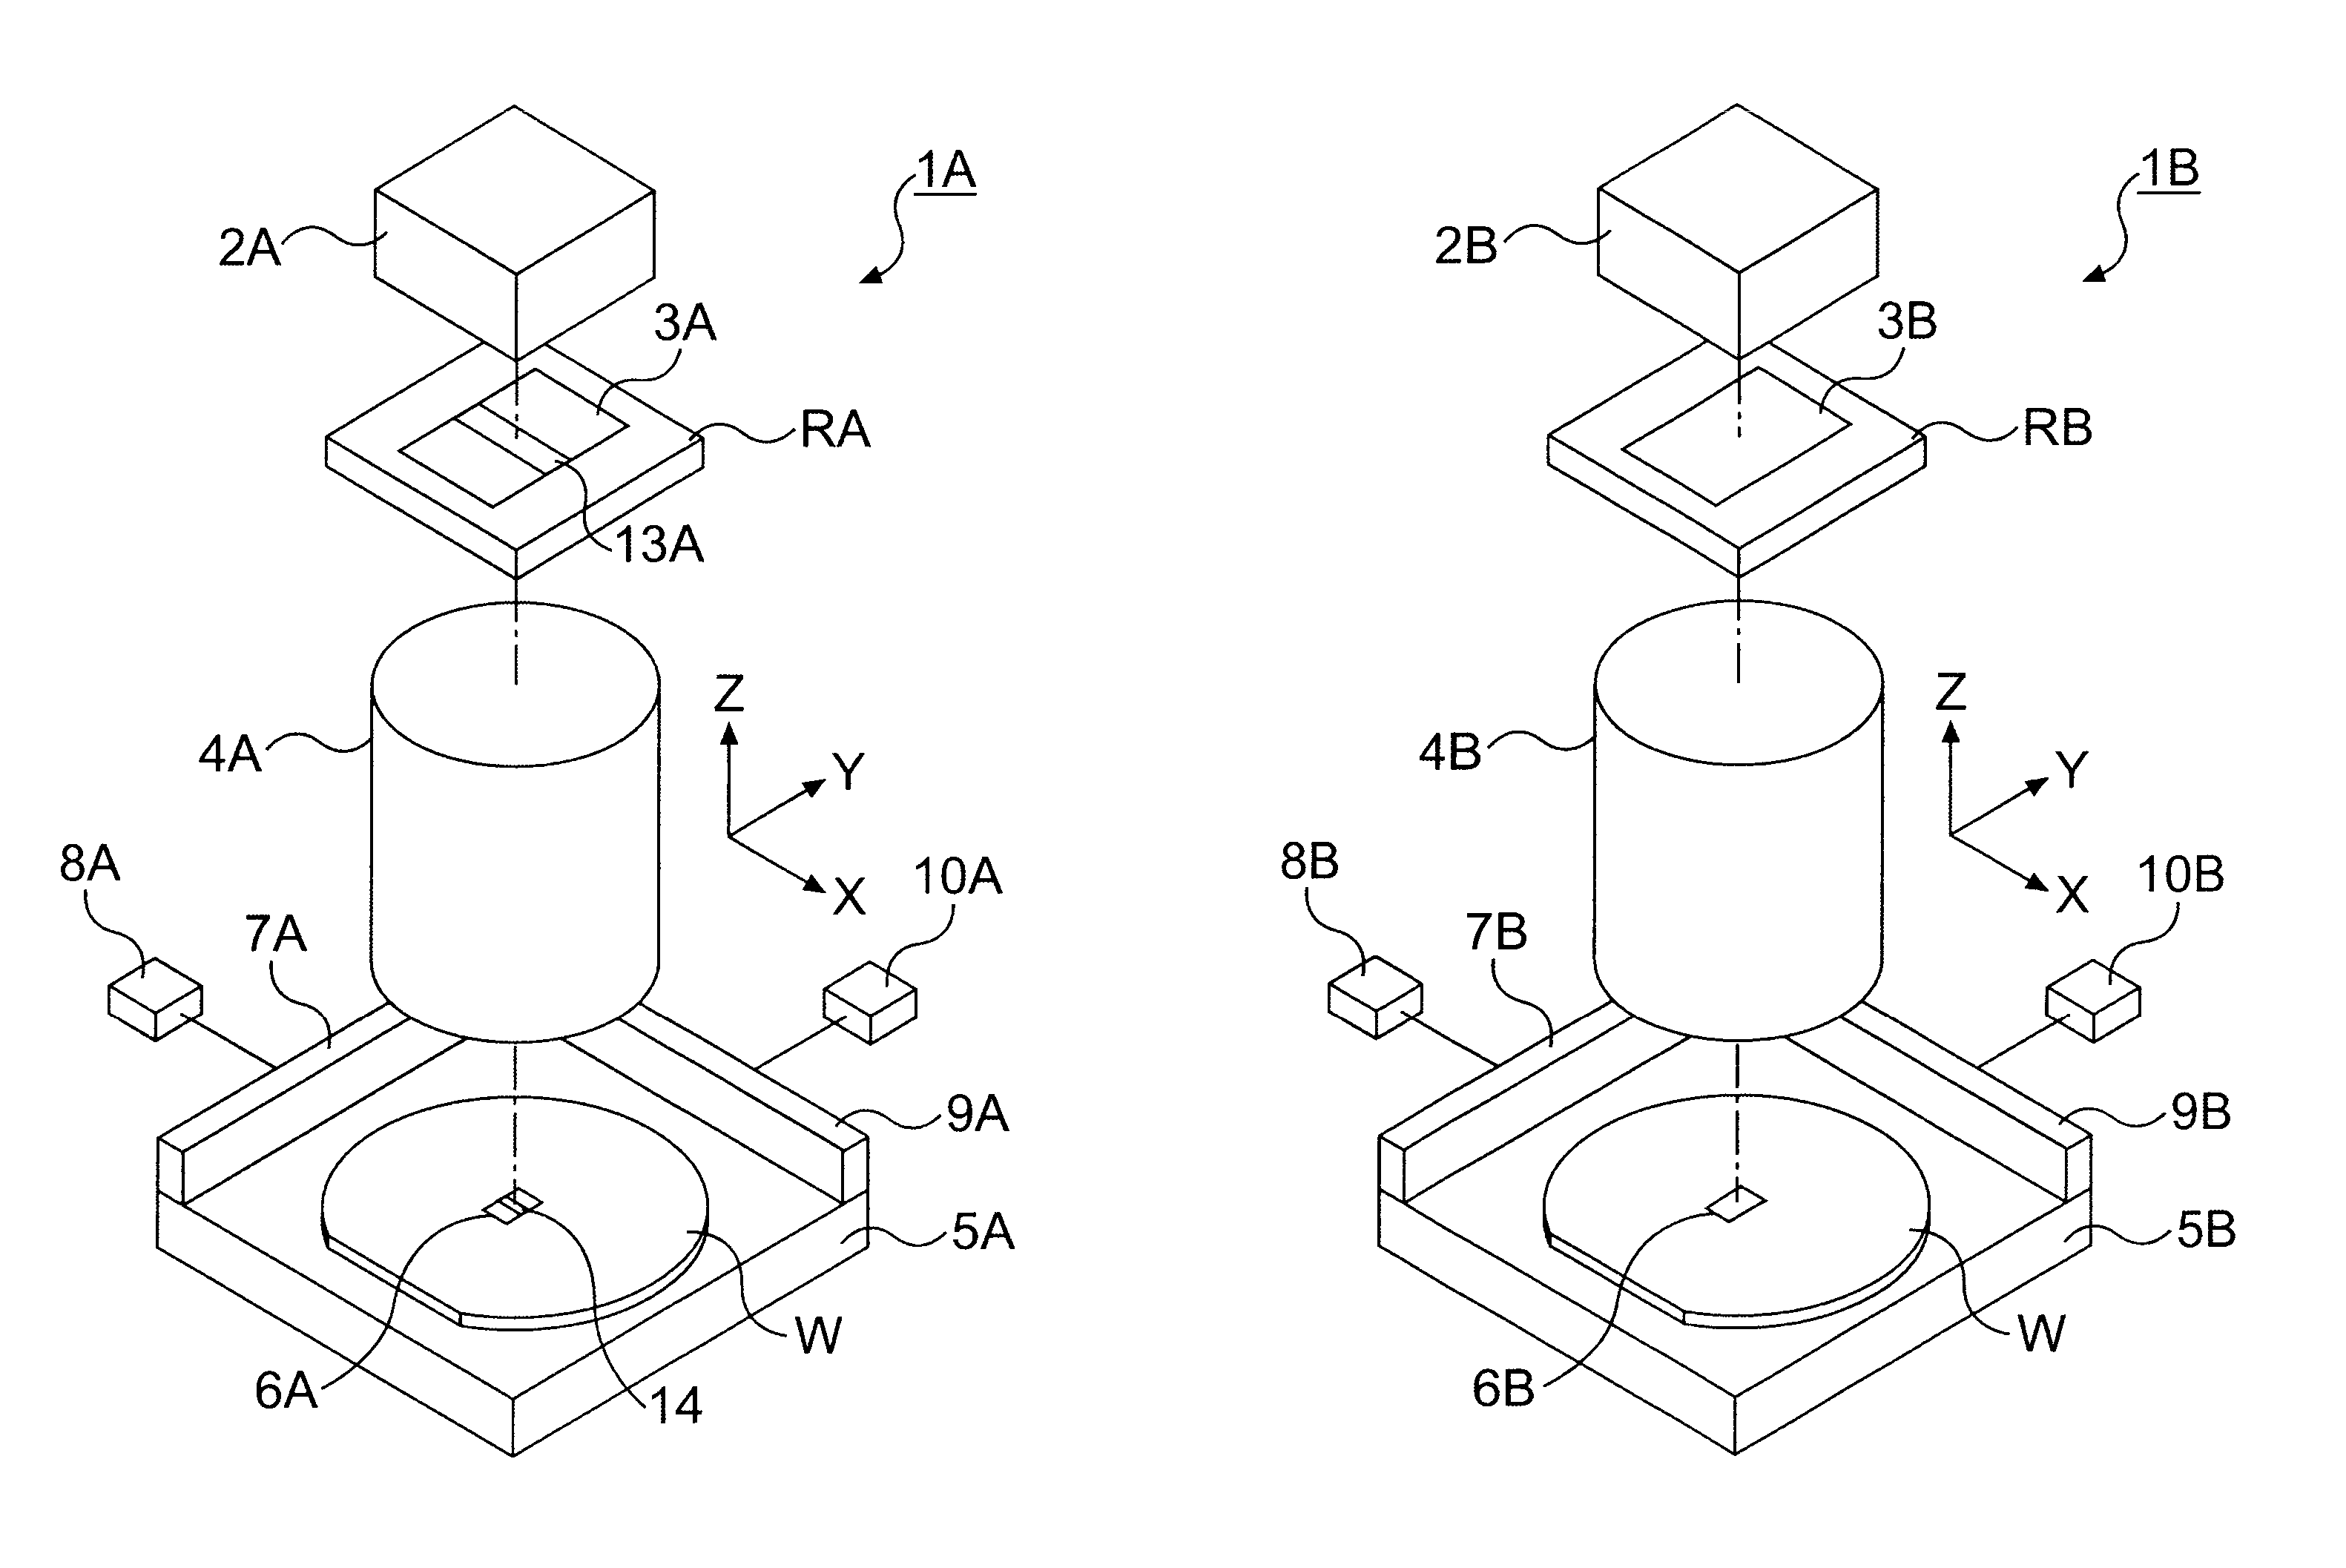 Exposure apparatus, a photolithography method, and a device manufactured by the same